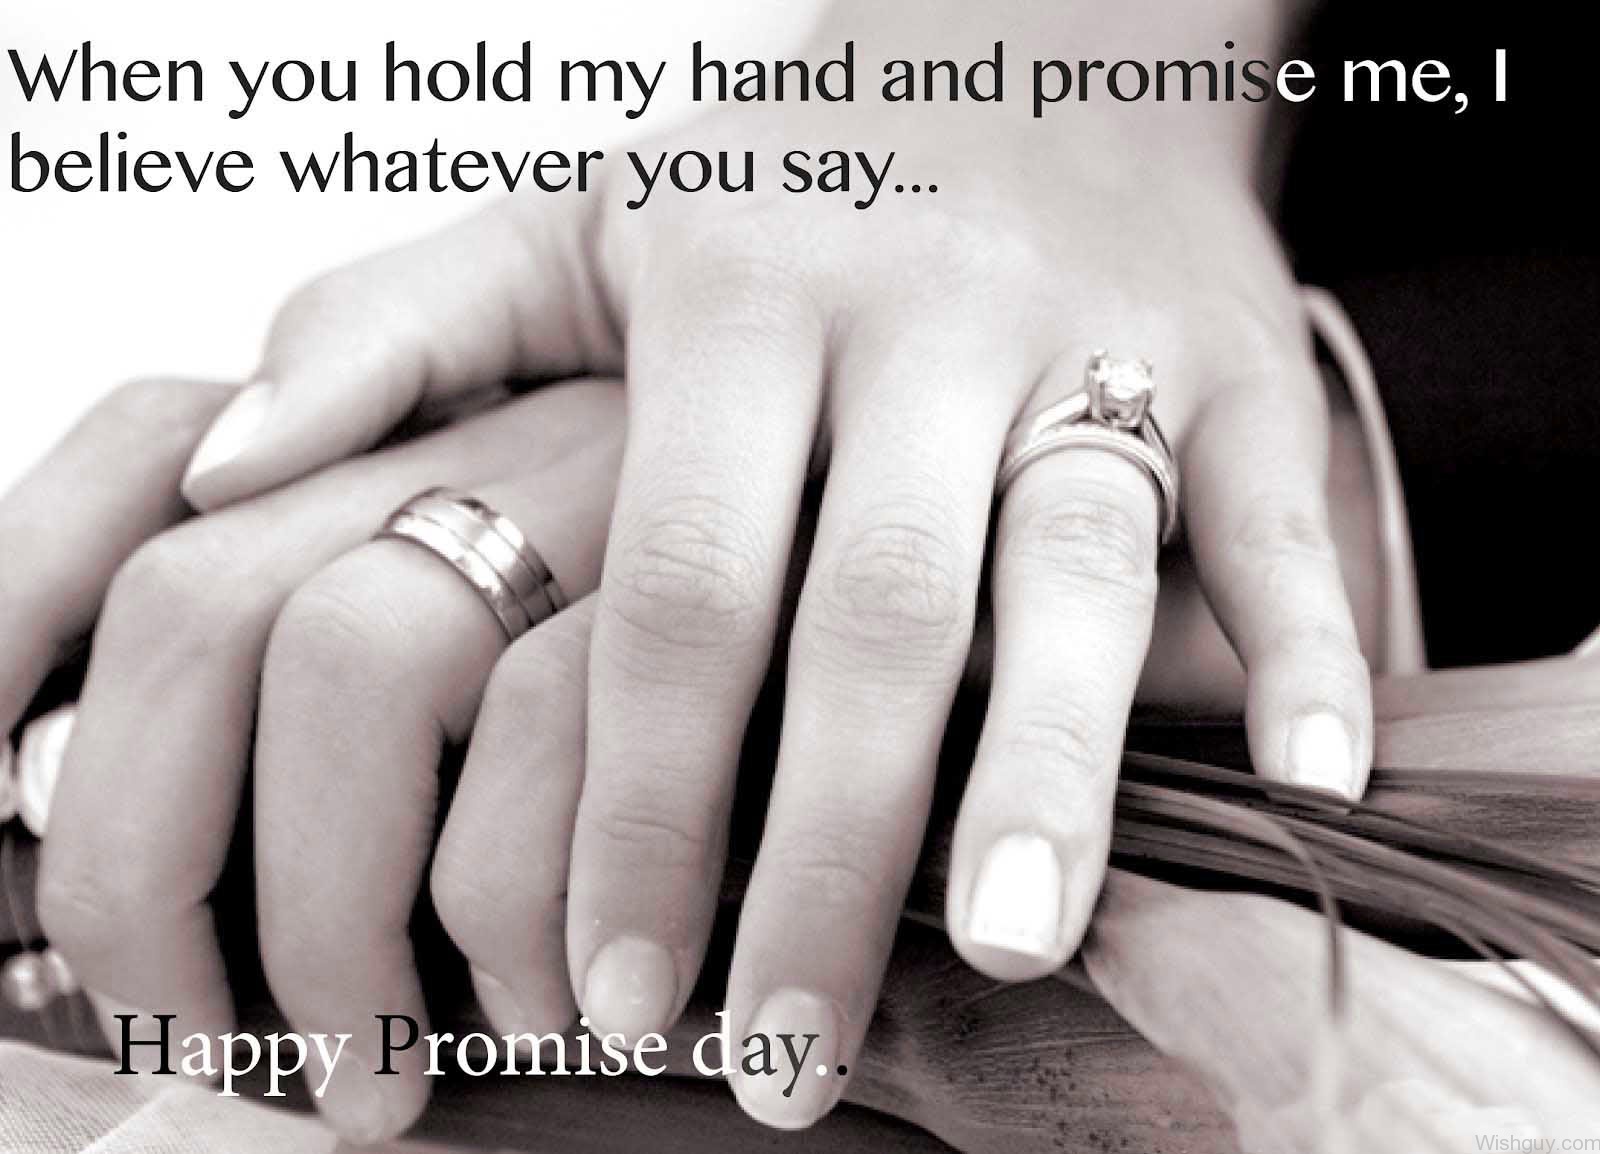 Happy Promise Day -mn2 - Wishes, Greetings, Pictures – Wish Guy